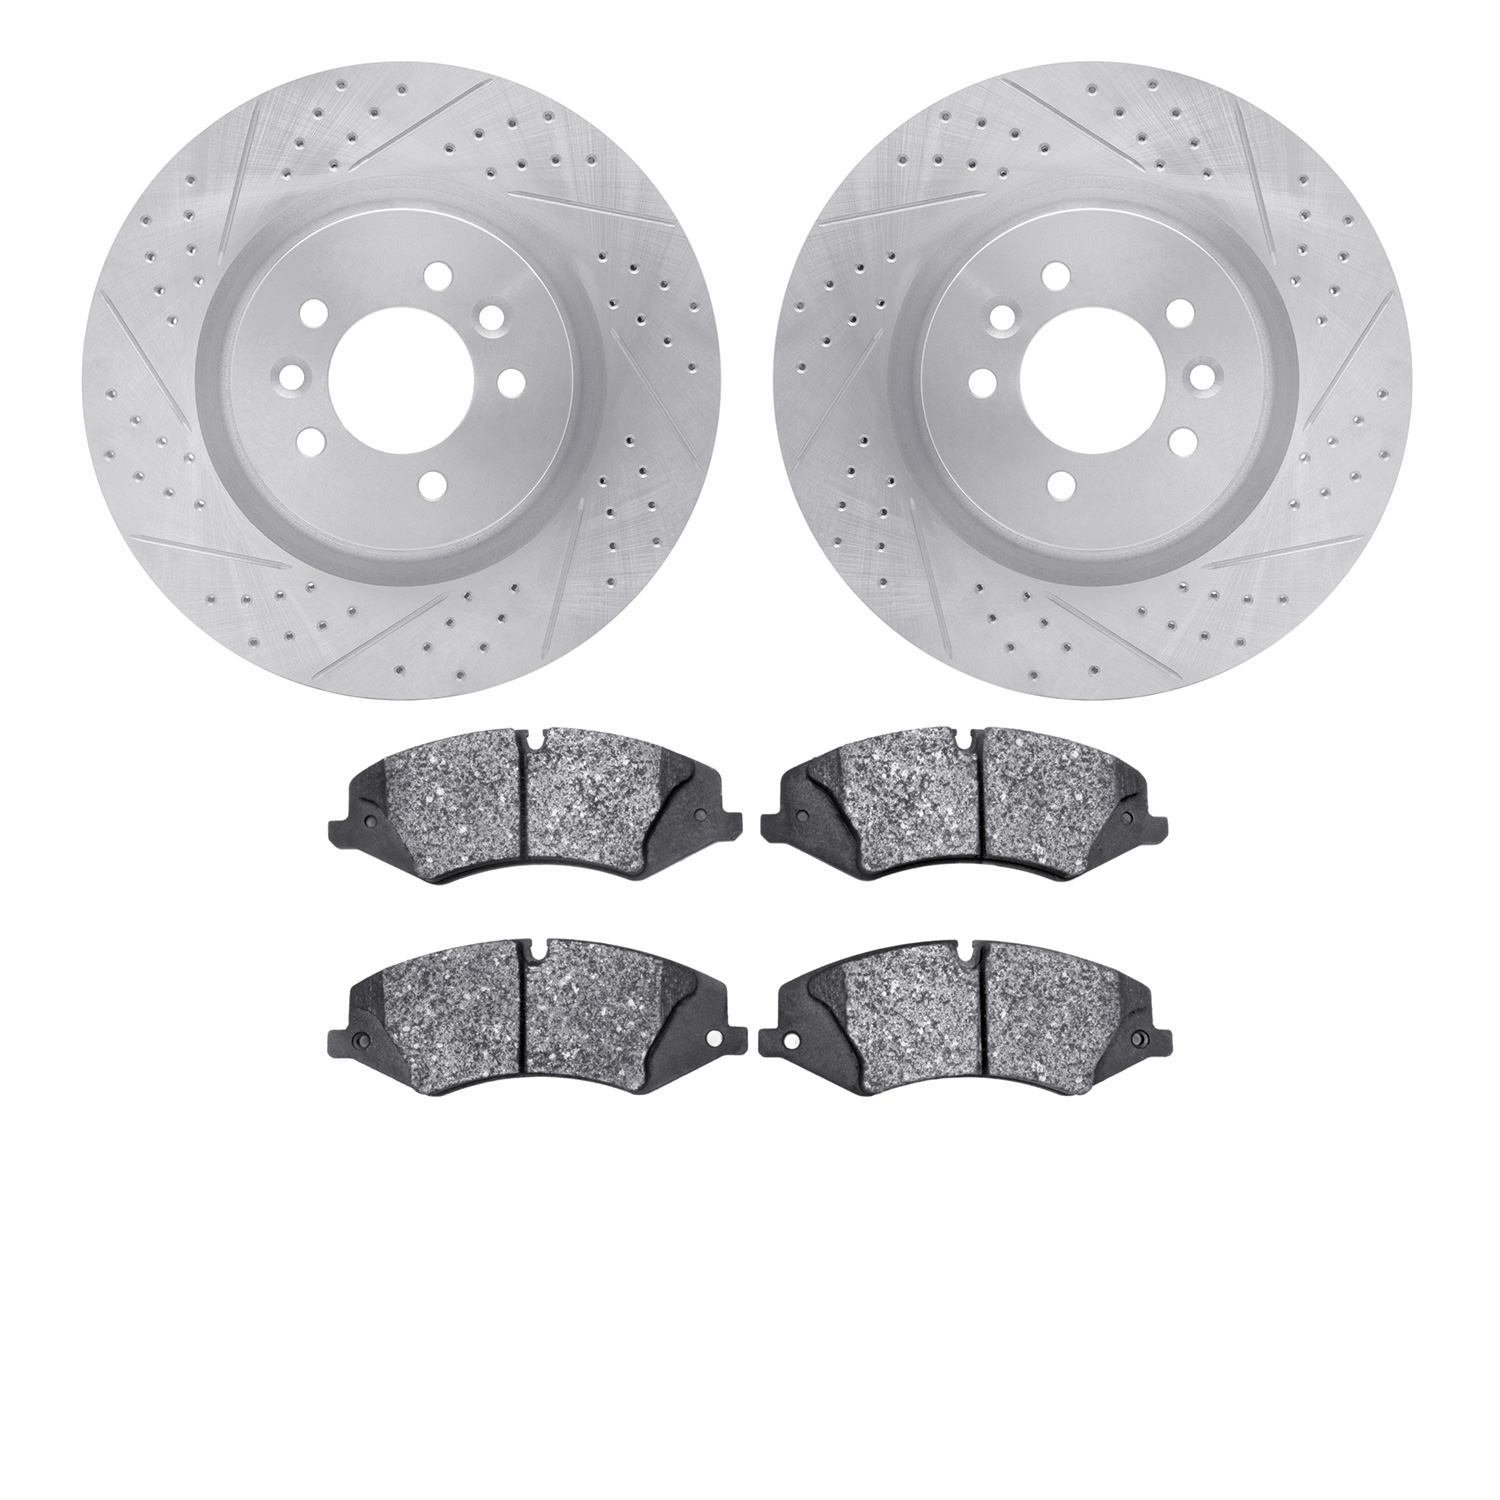 2502-11007 Geoperformance Drilled/Slotted Rotors w/5000 Advanced Brake Pads Kit, 2010-2017 Land Rover, Position: Front